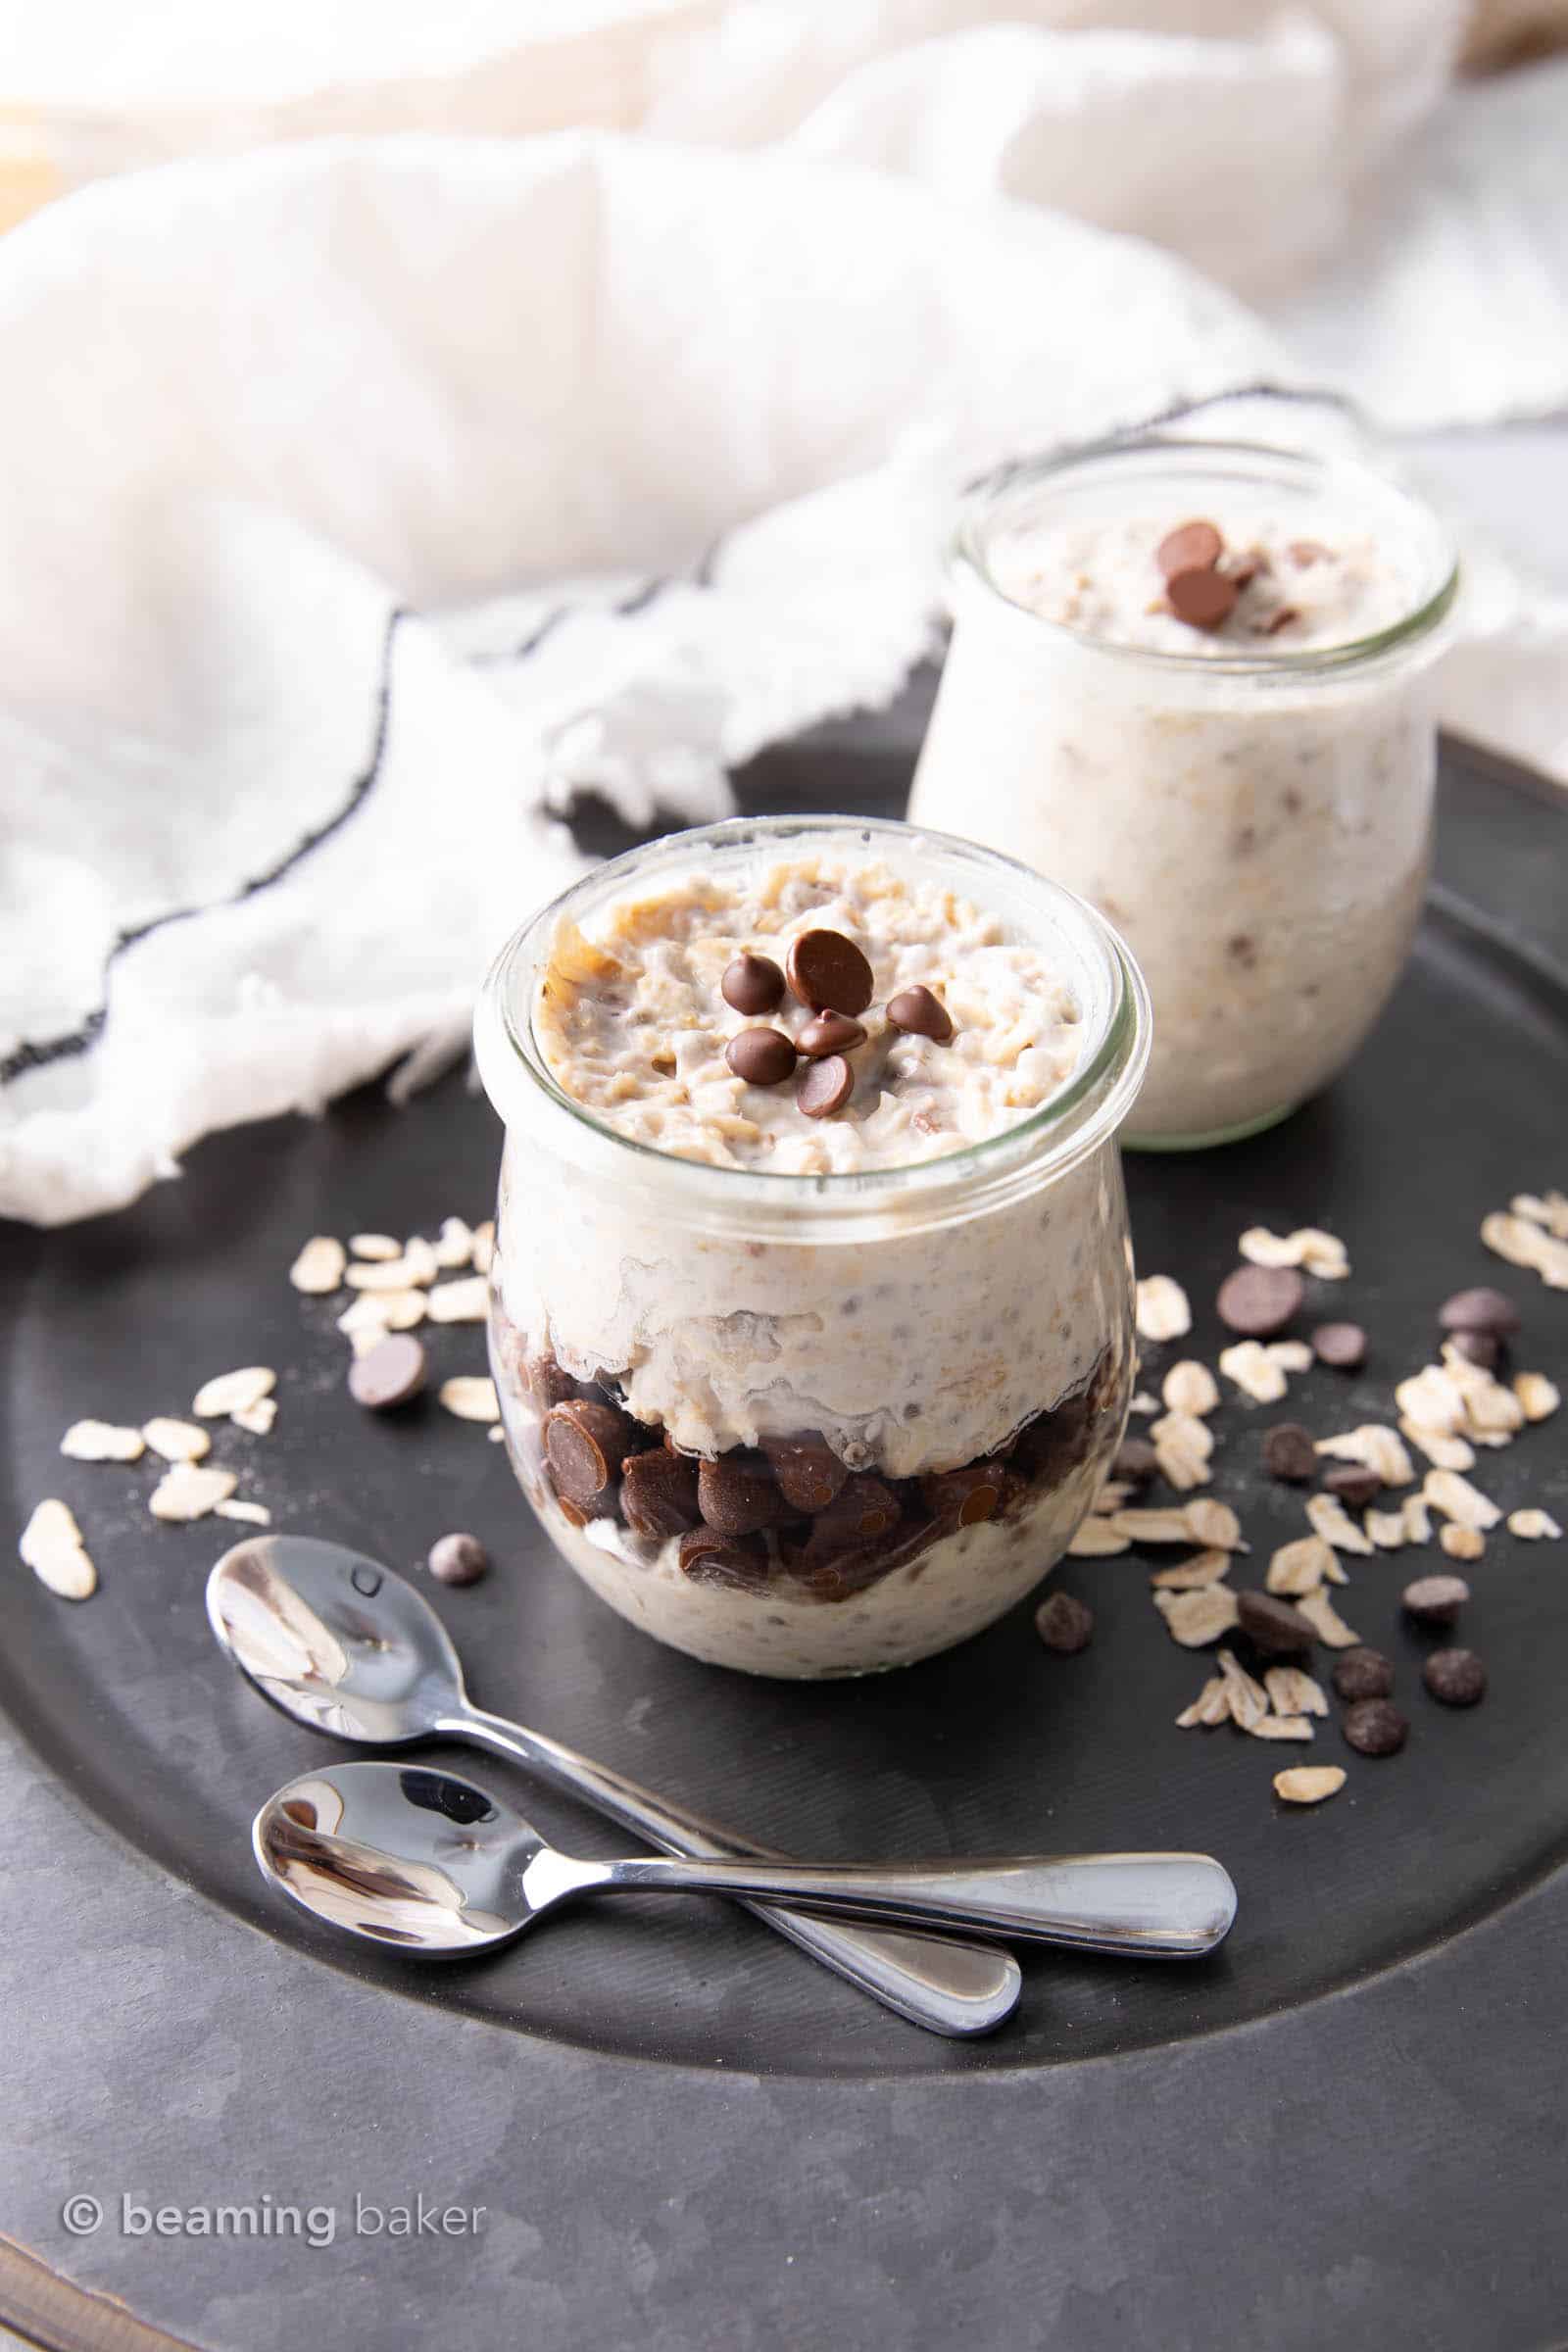 Chocolate Chip Overnight Oats: an easy vegan overnight oats recipe that’s creamy, rich and chockfull of vegan chocolate chips! A quick breakfast made the night before. #Vegan #OvernightOats #OvernightOatmeal #ChocolateChips | Recipe at BeamingBaker.com